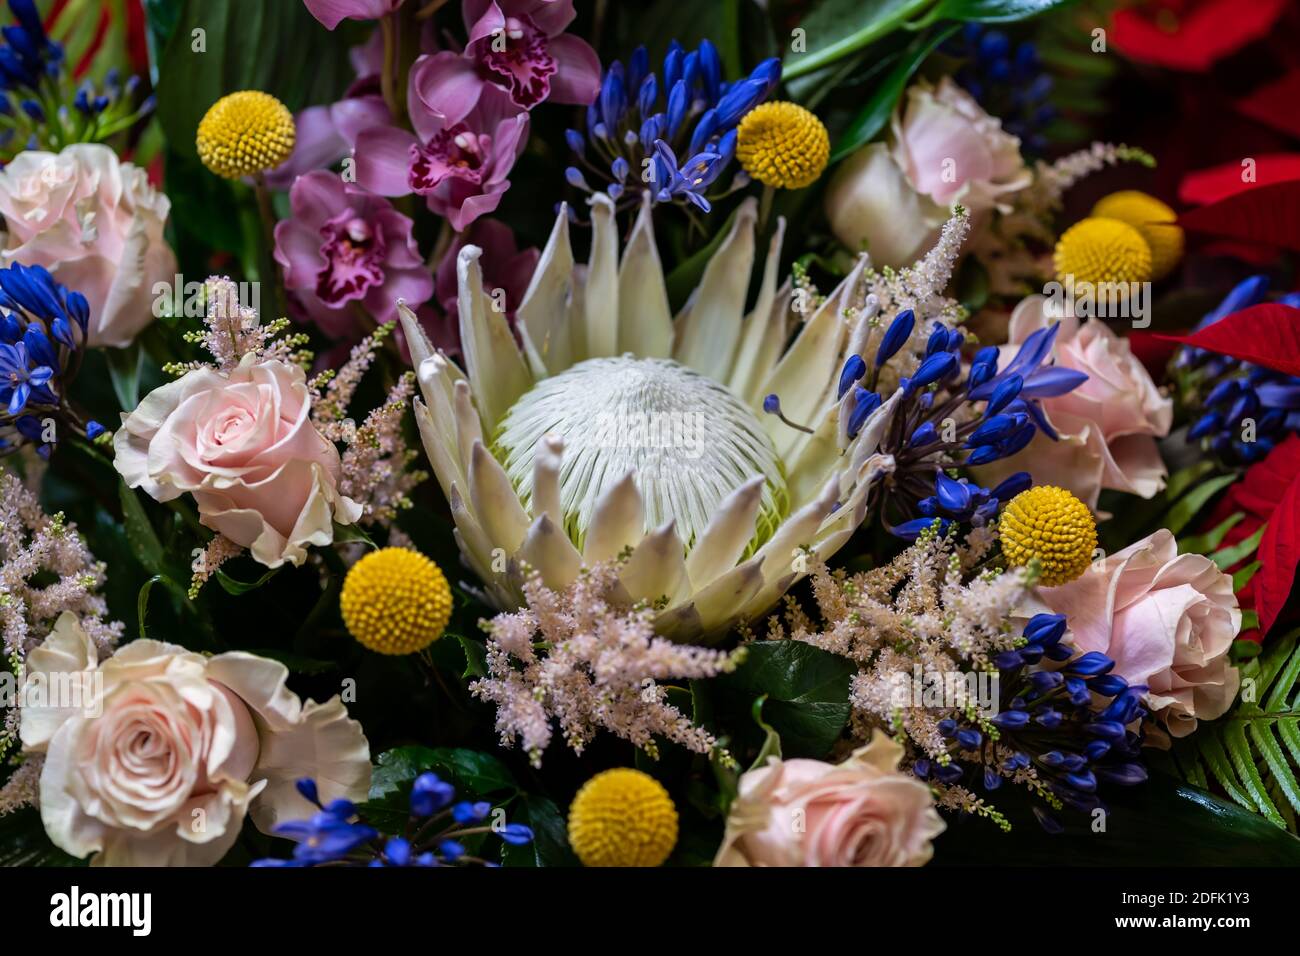 Bouquet of varied flowers from the florist's shop for a wedding or celebration Stock Photo